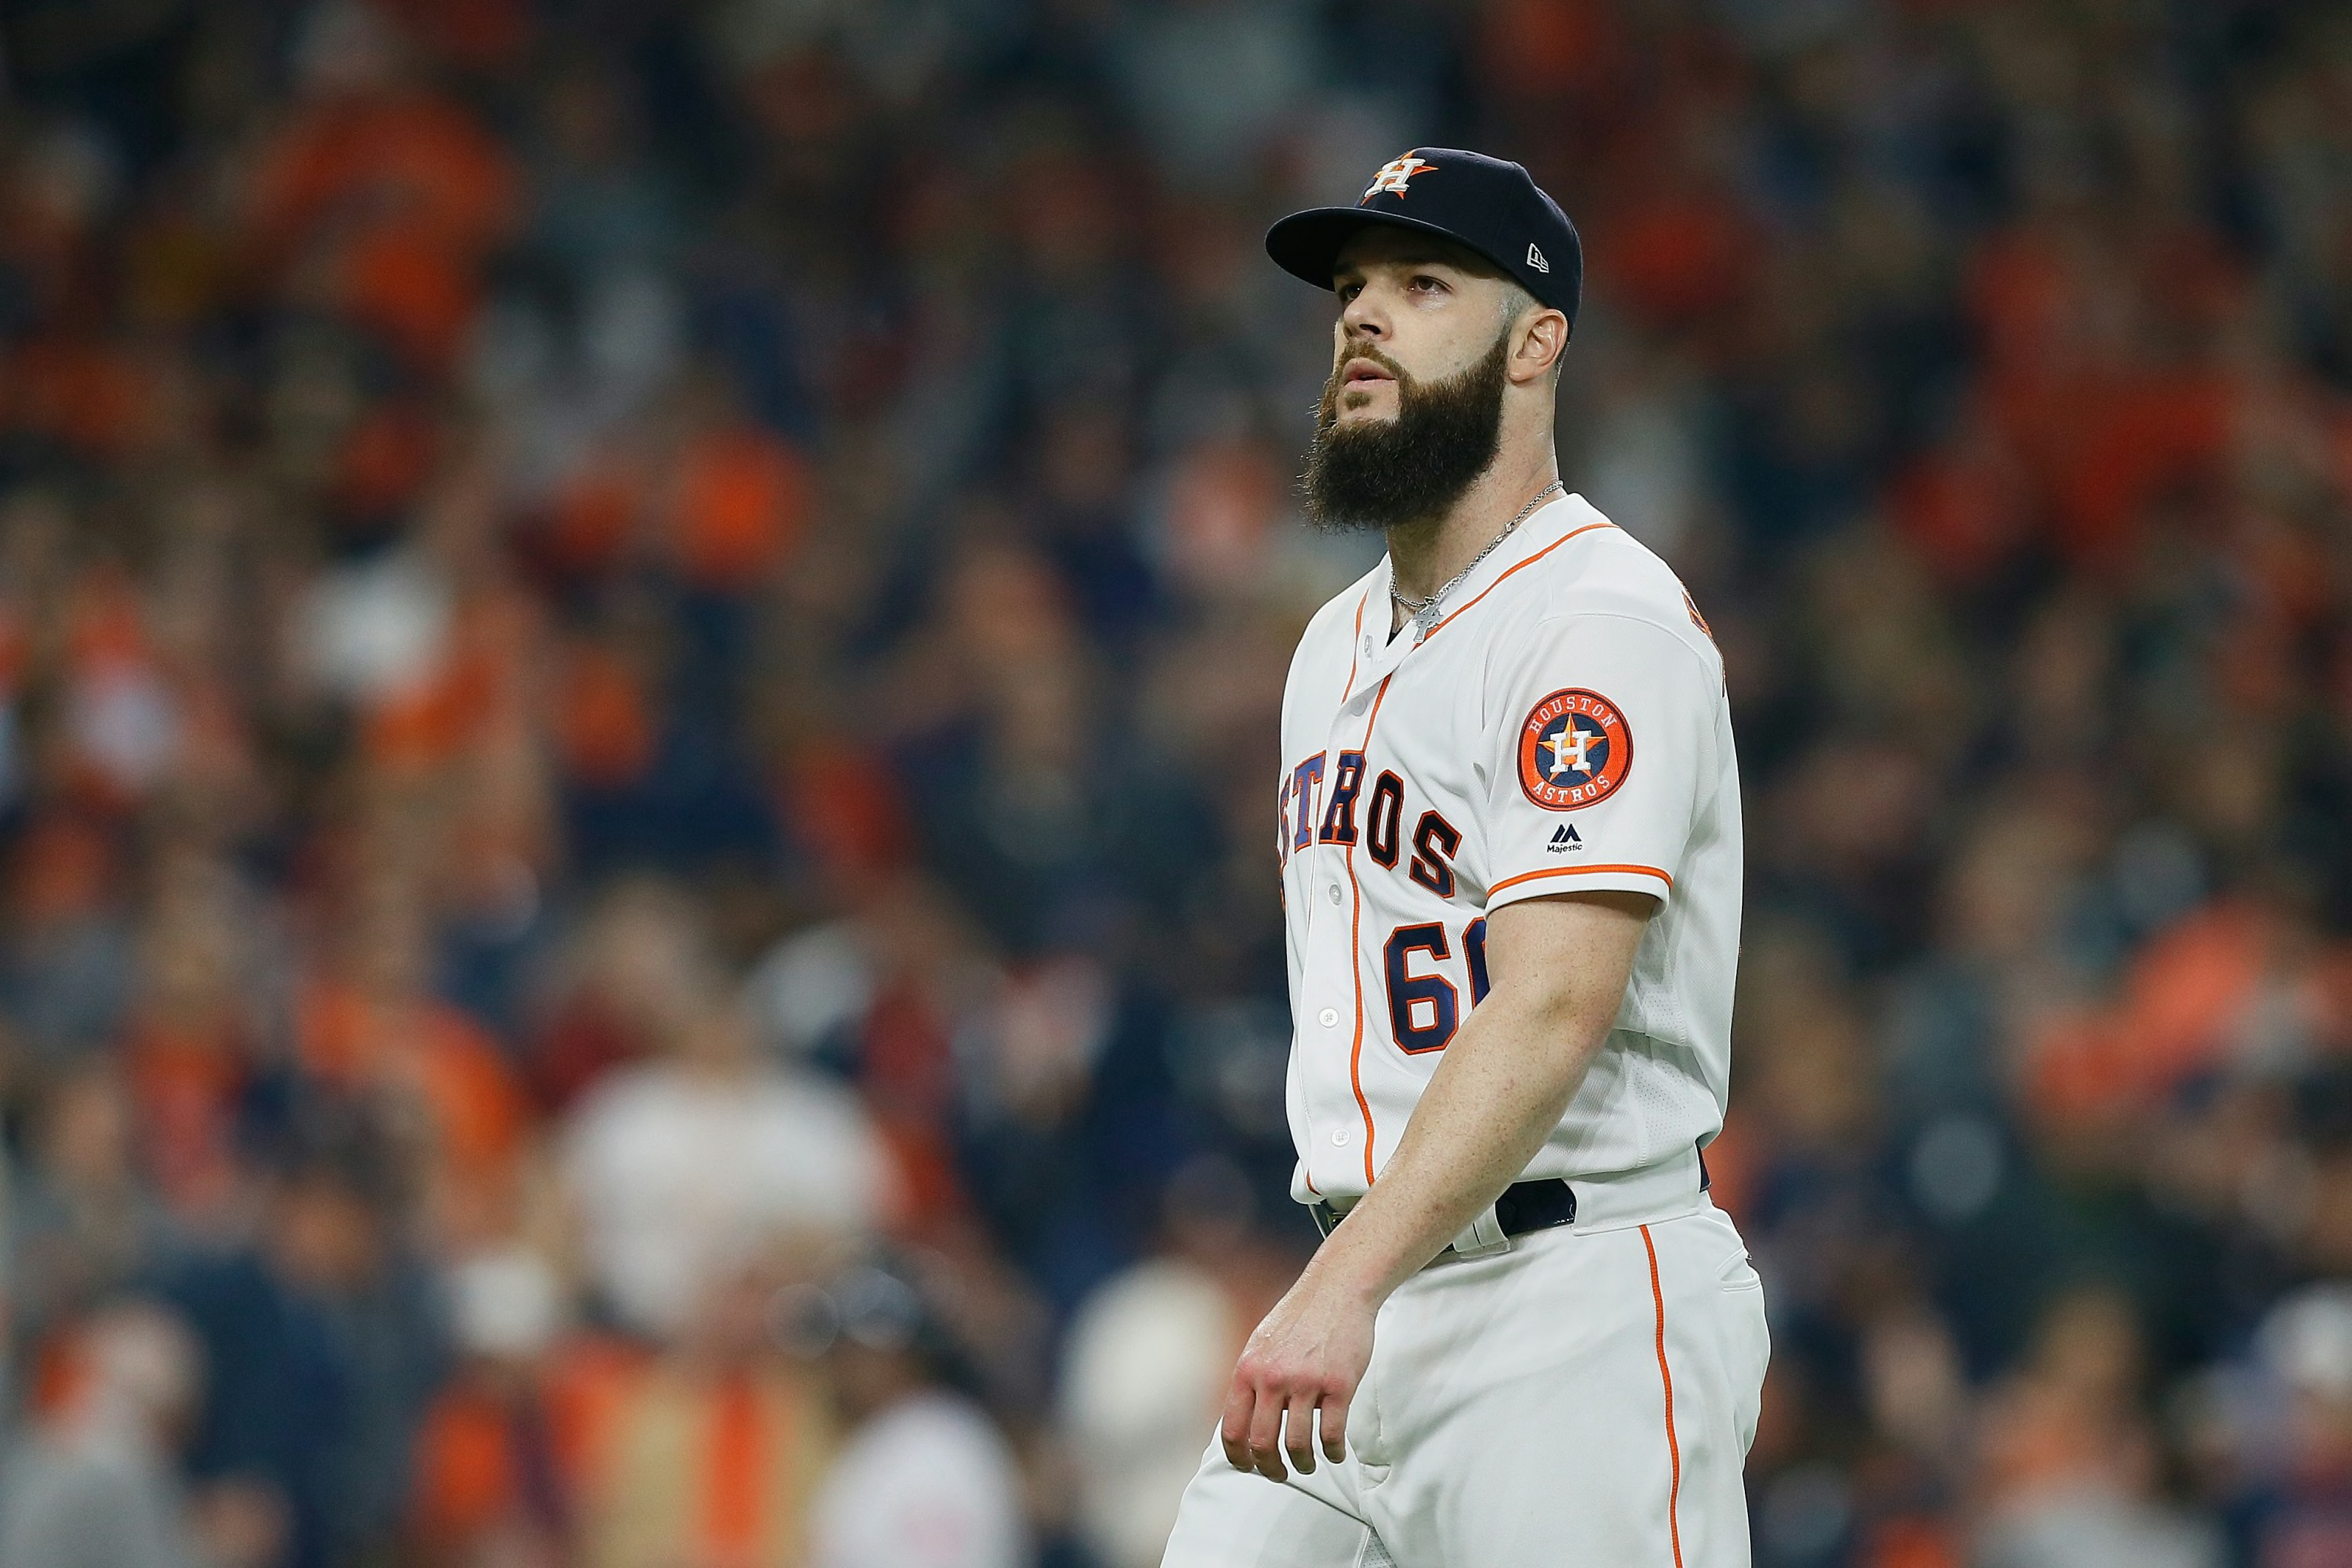 Houston Astros: 3 reasons why Dallas Keuchel should be brought back